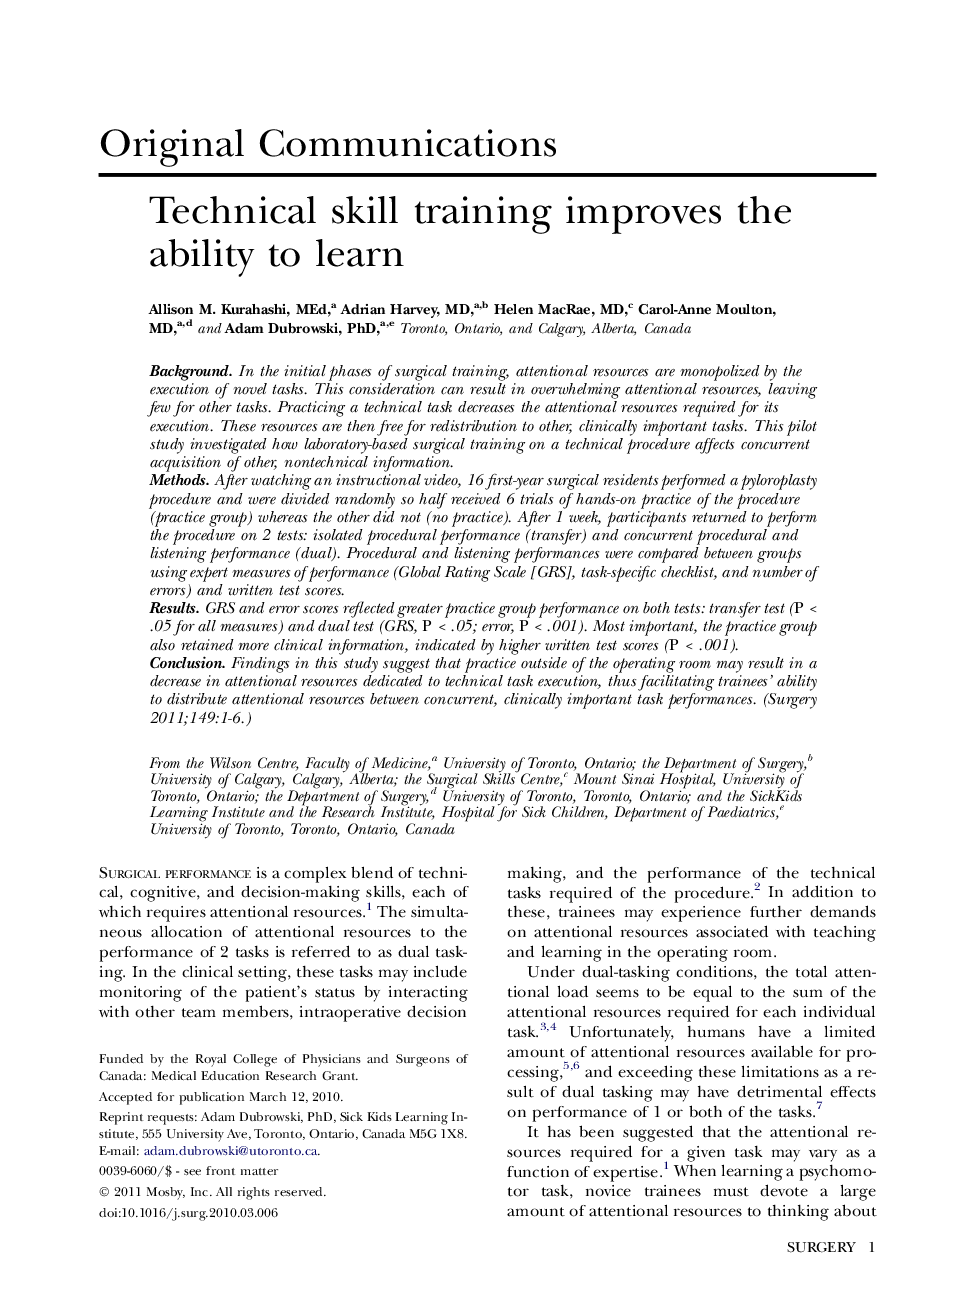 Technical skill training improves the ability to learn 